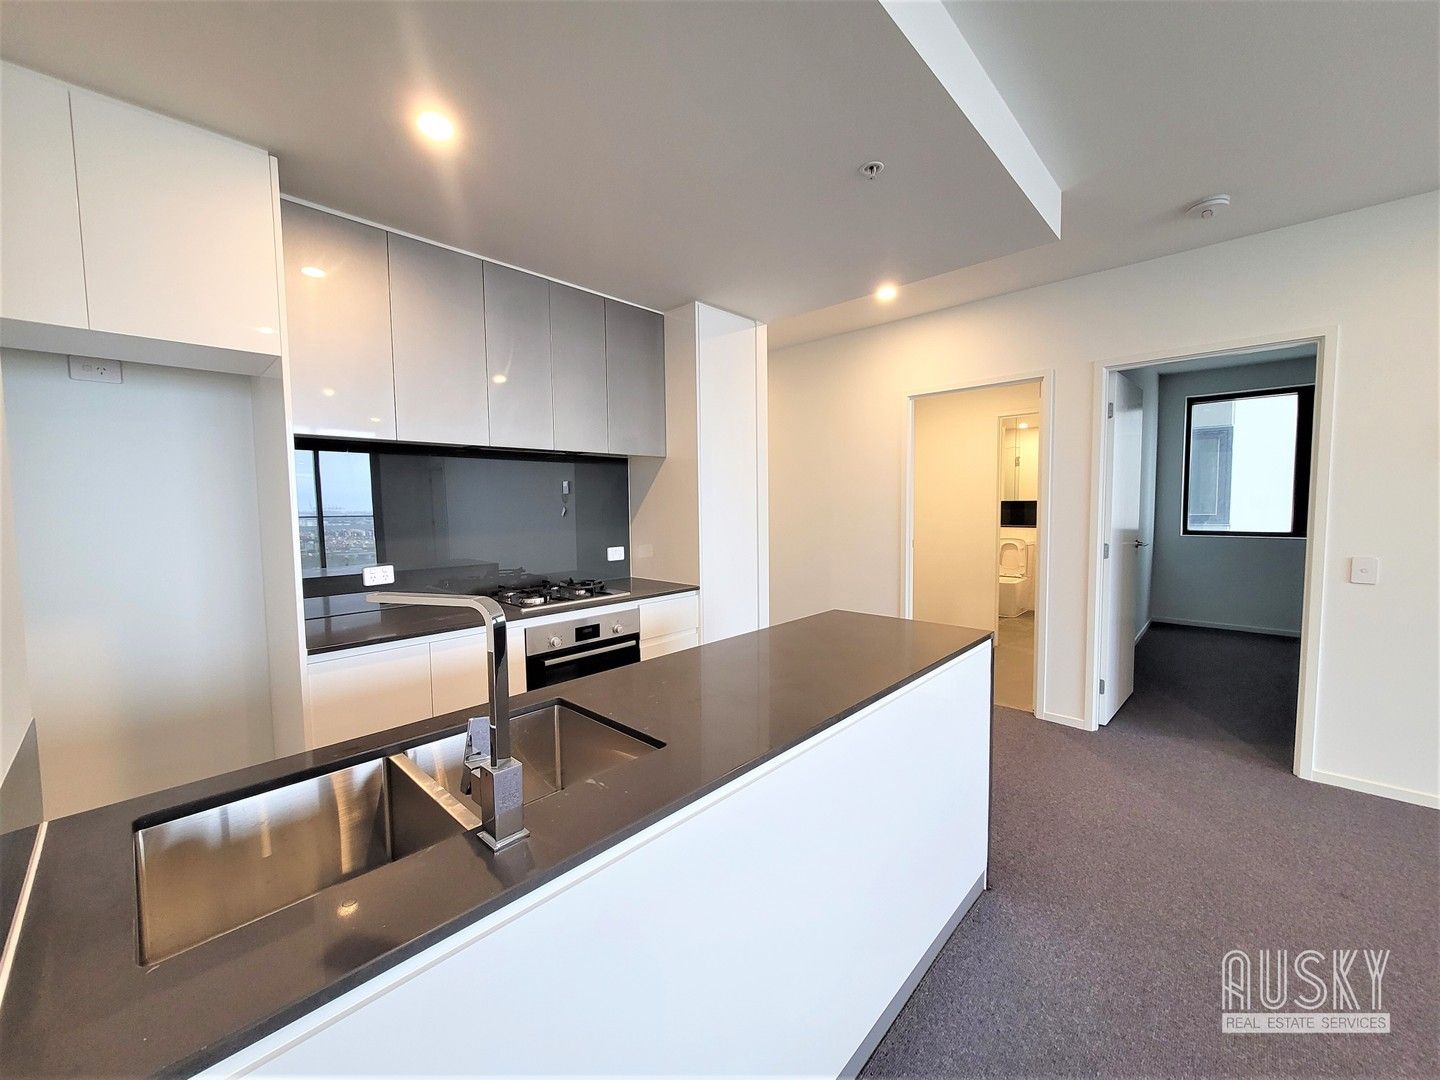 3 bedrooms Apartment / Unit / Flat in 1103C/2 Tannery Walk FOOTSCRAY VIC, 3011